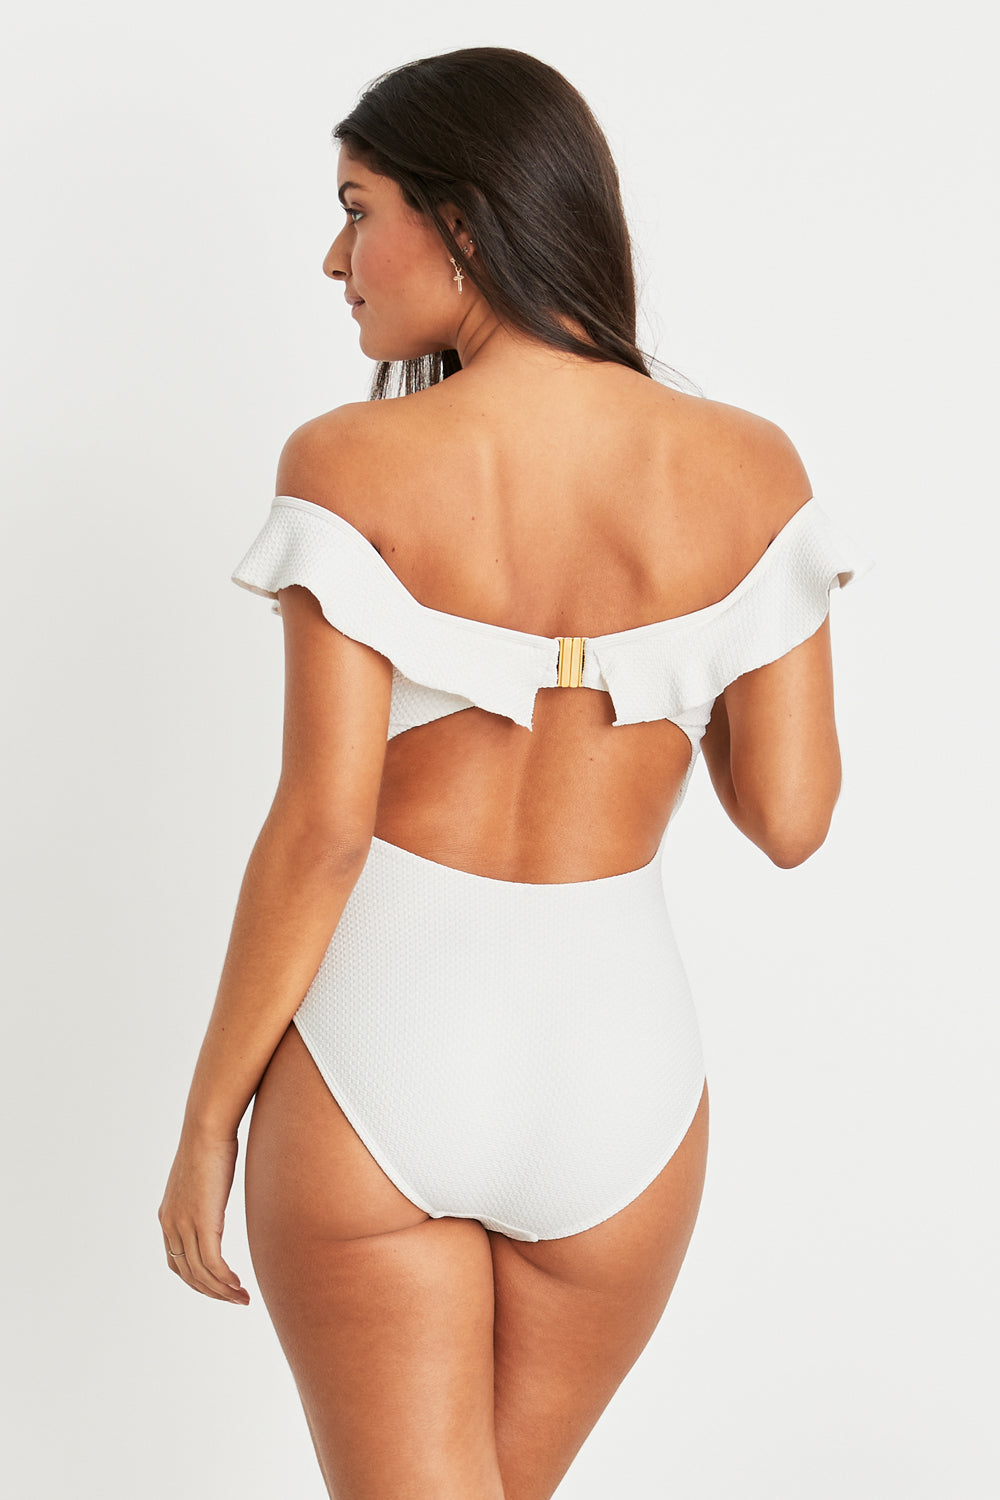 Toni One-piece Swimsuit by Hermoza